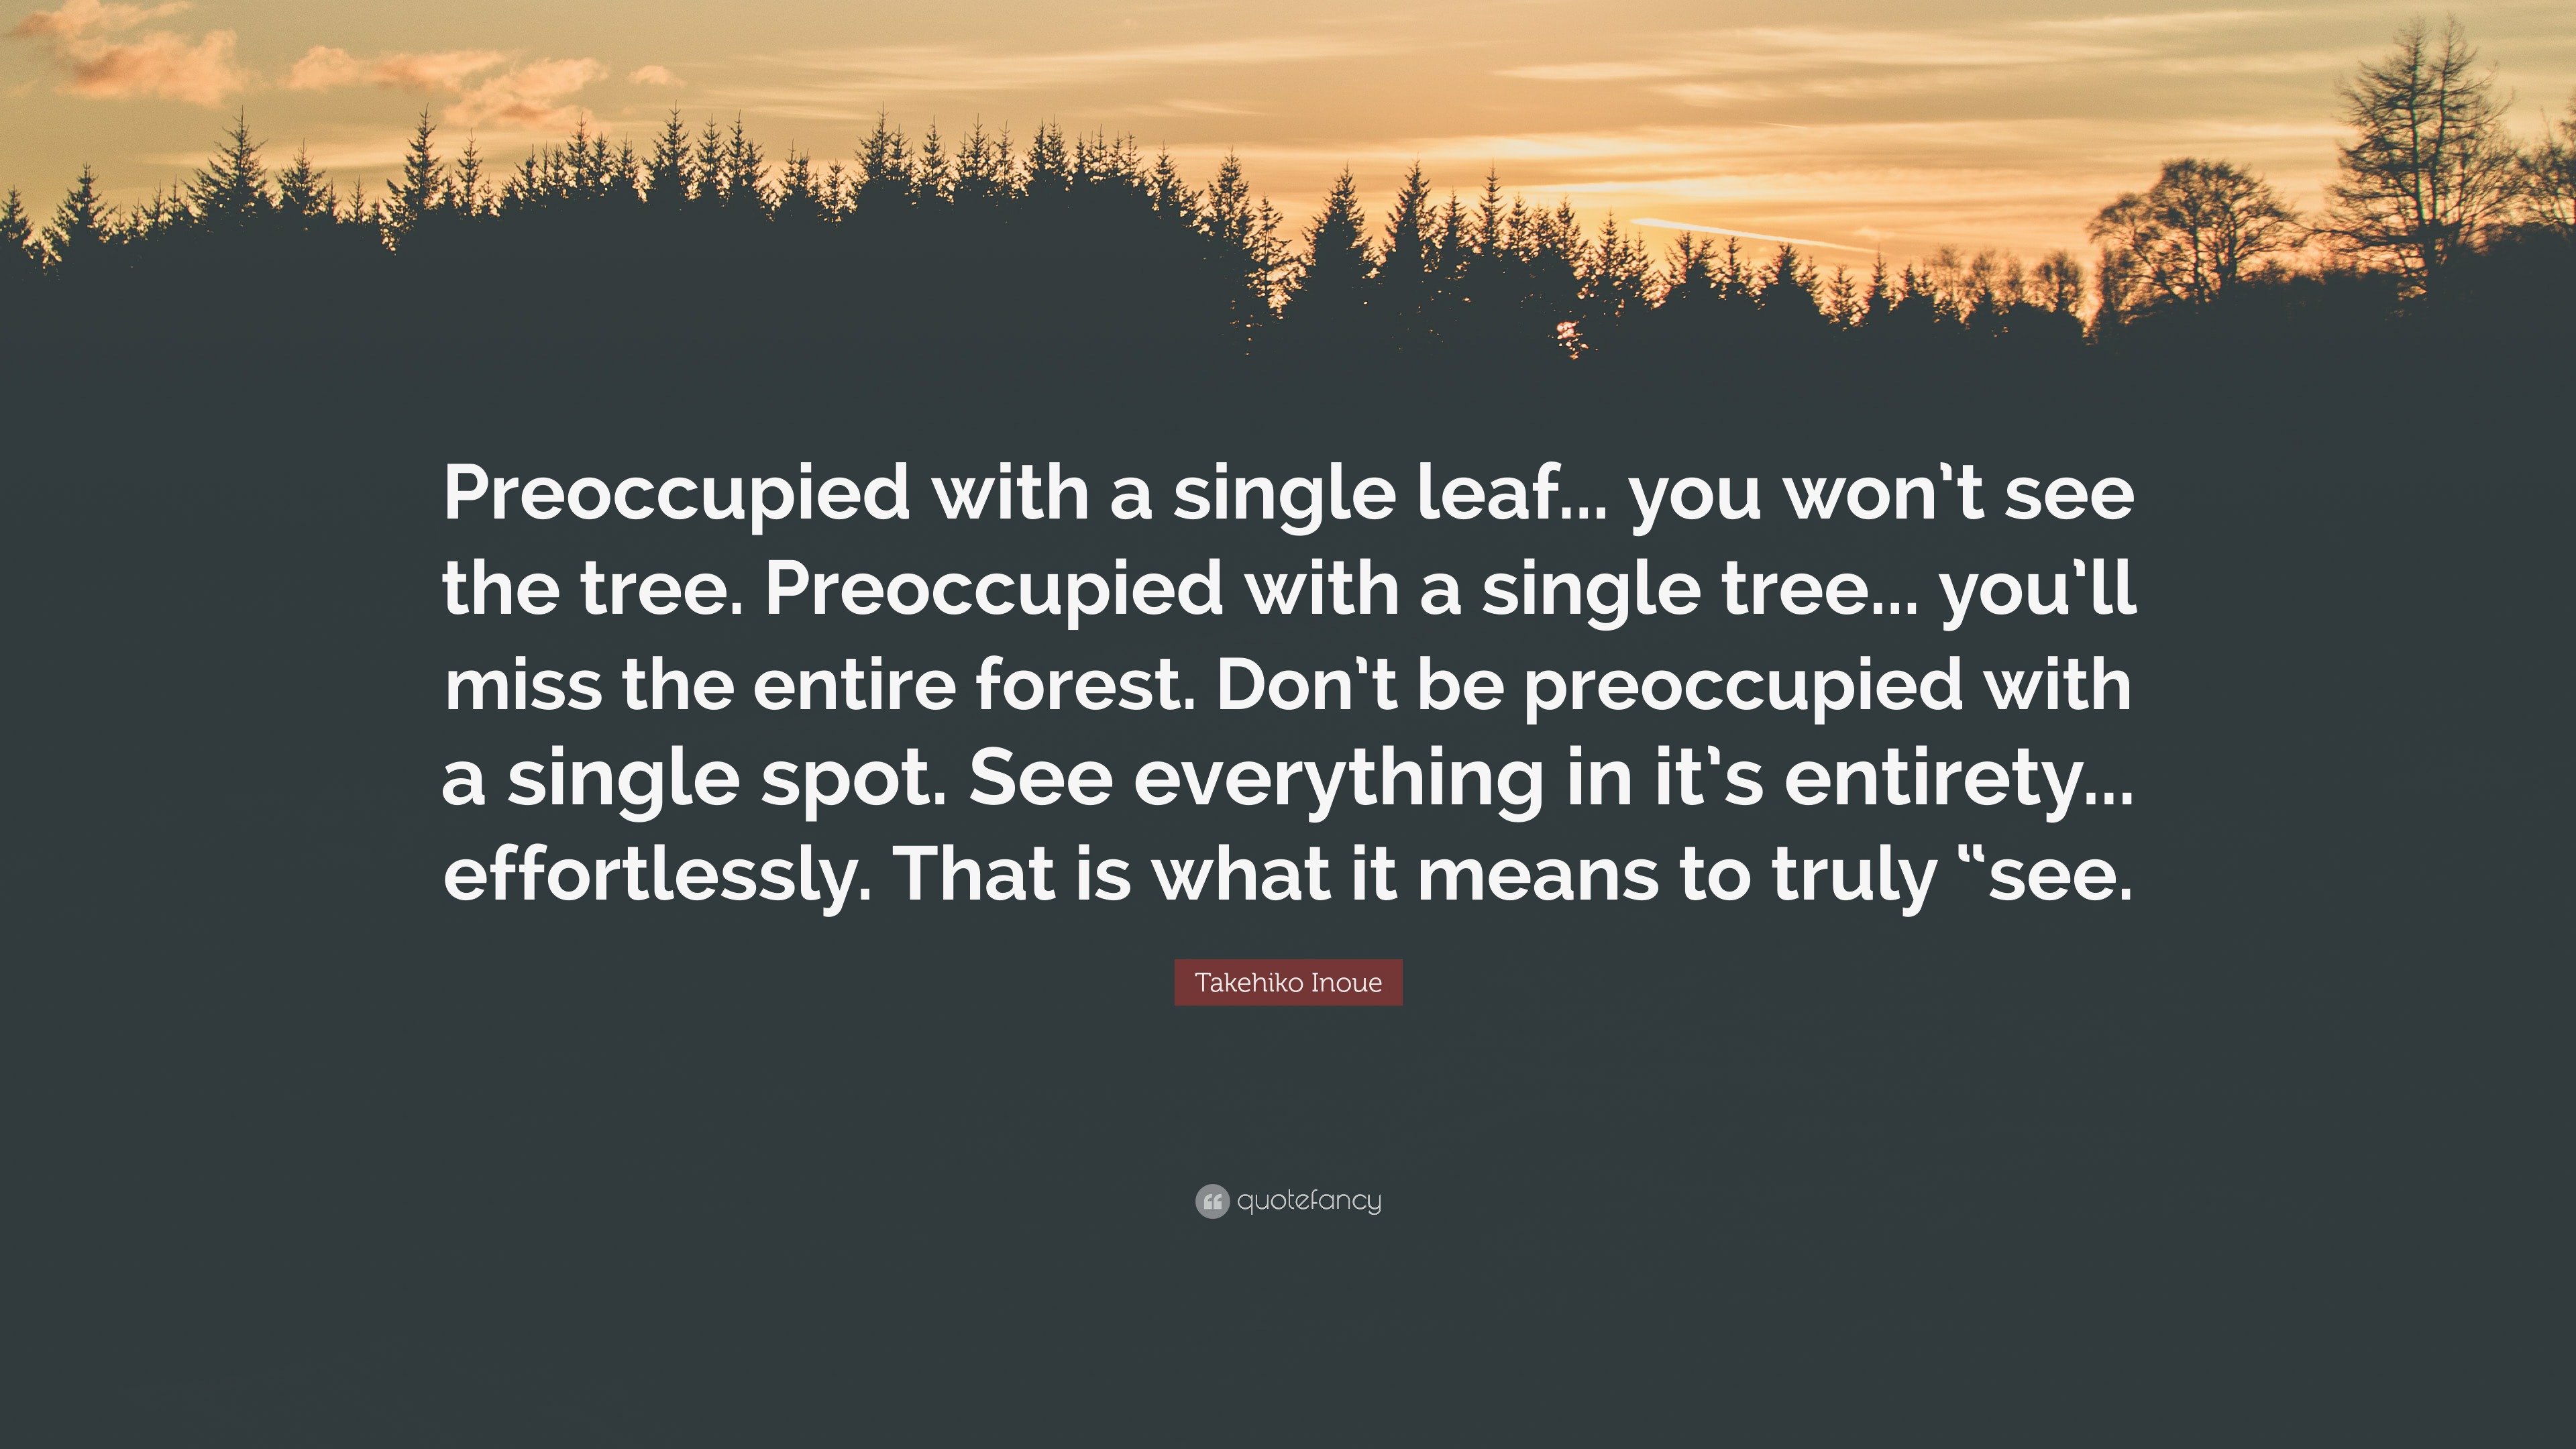 ONE LEAF DOESN'T MAKE A FOREST